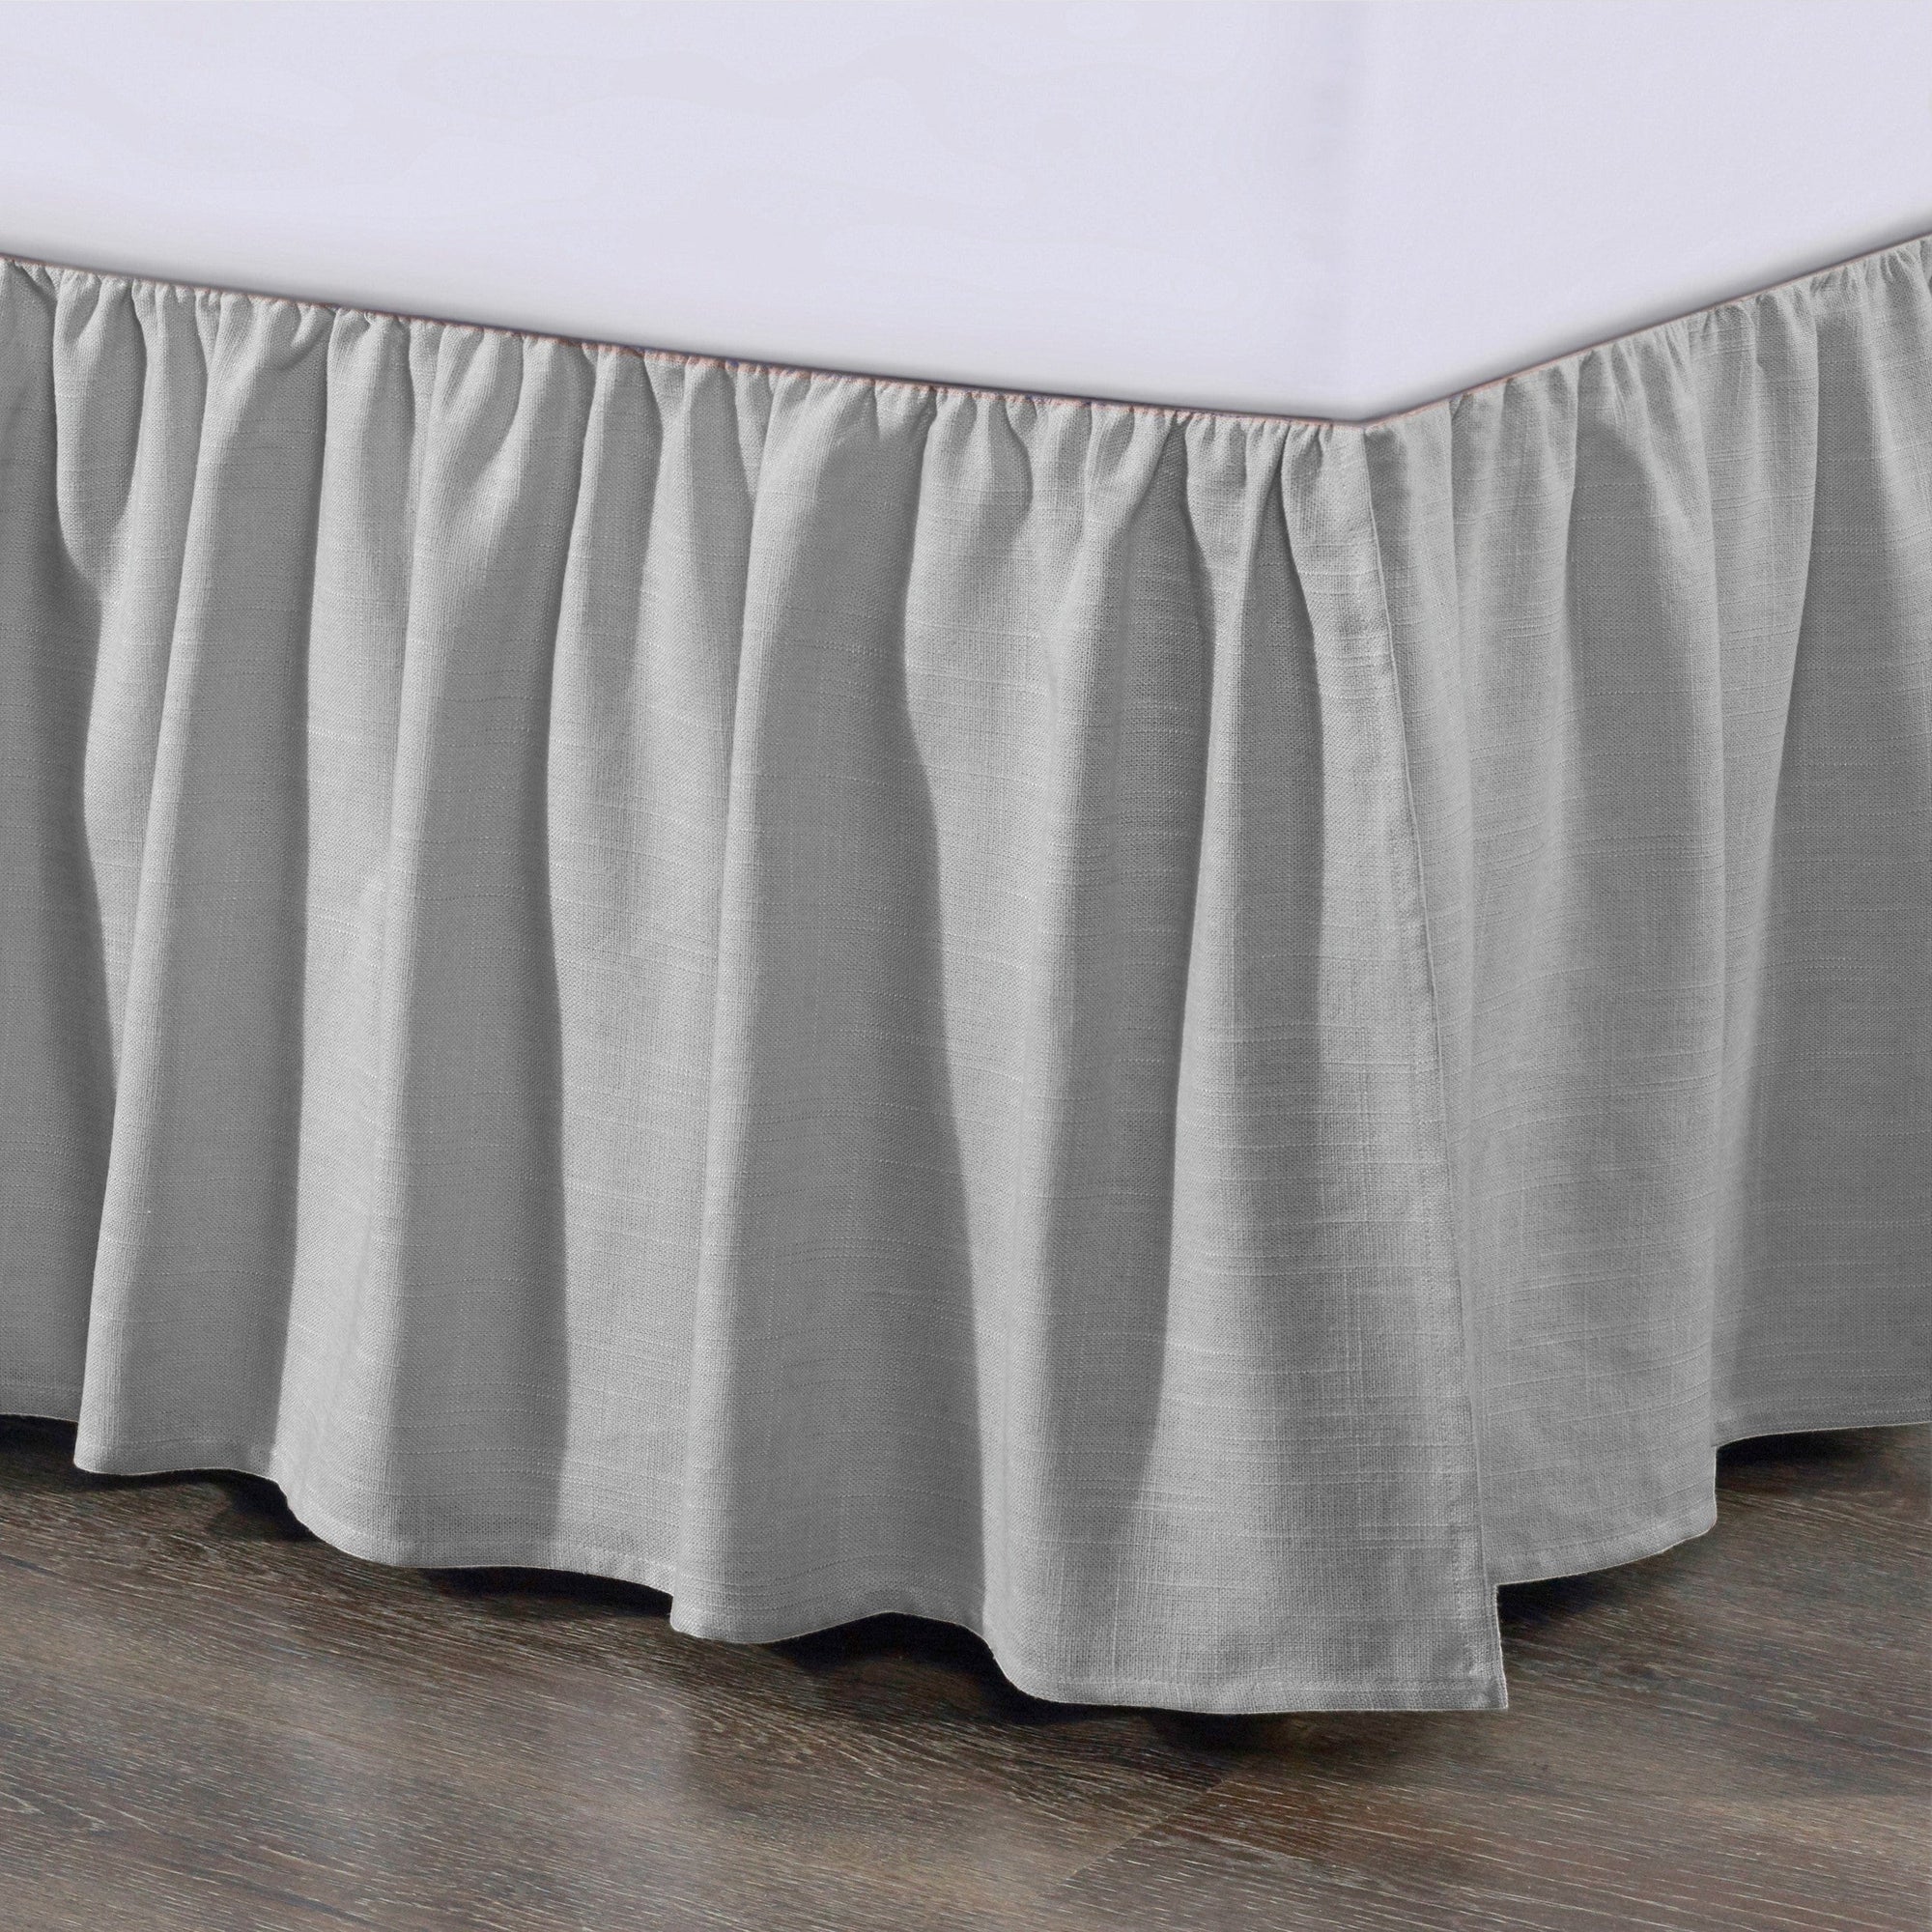 Lily Gathered Linen Bed Skirt Queen / Gray Bed Skirt